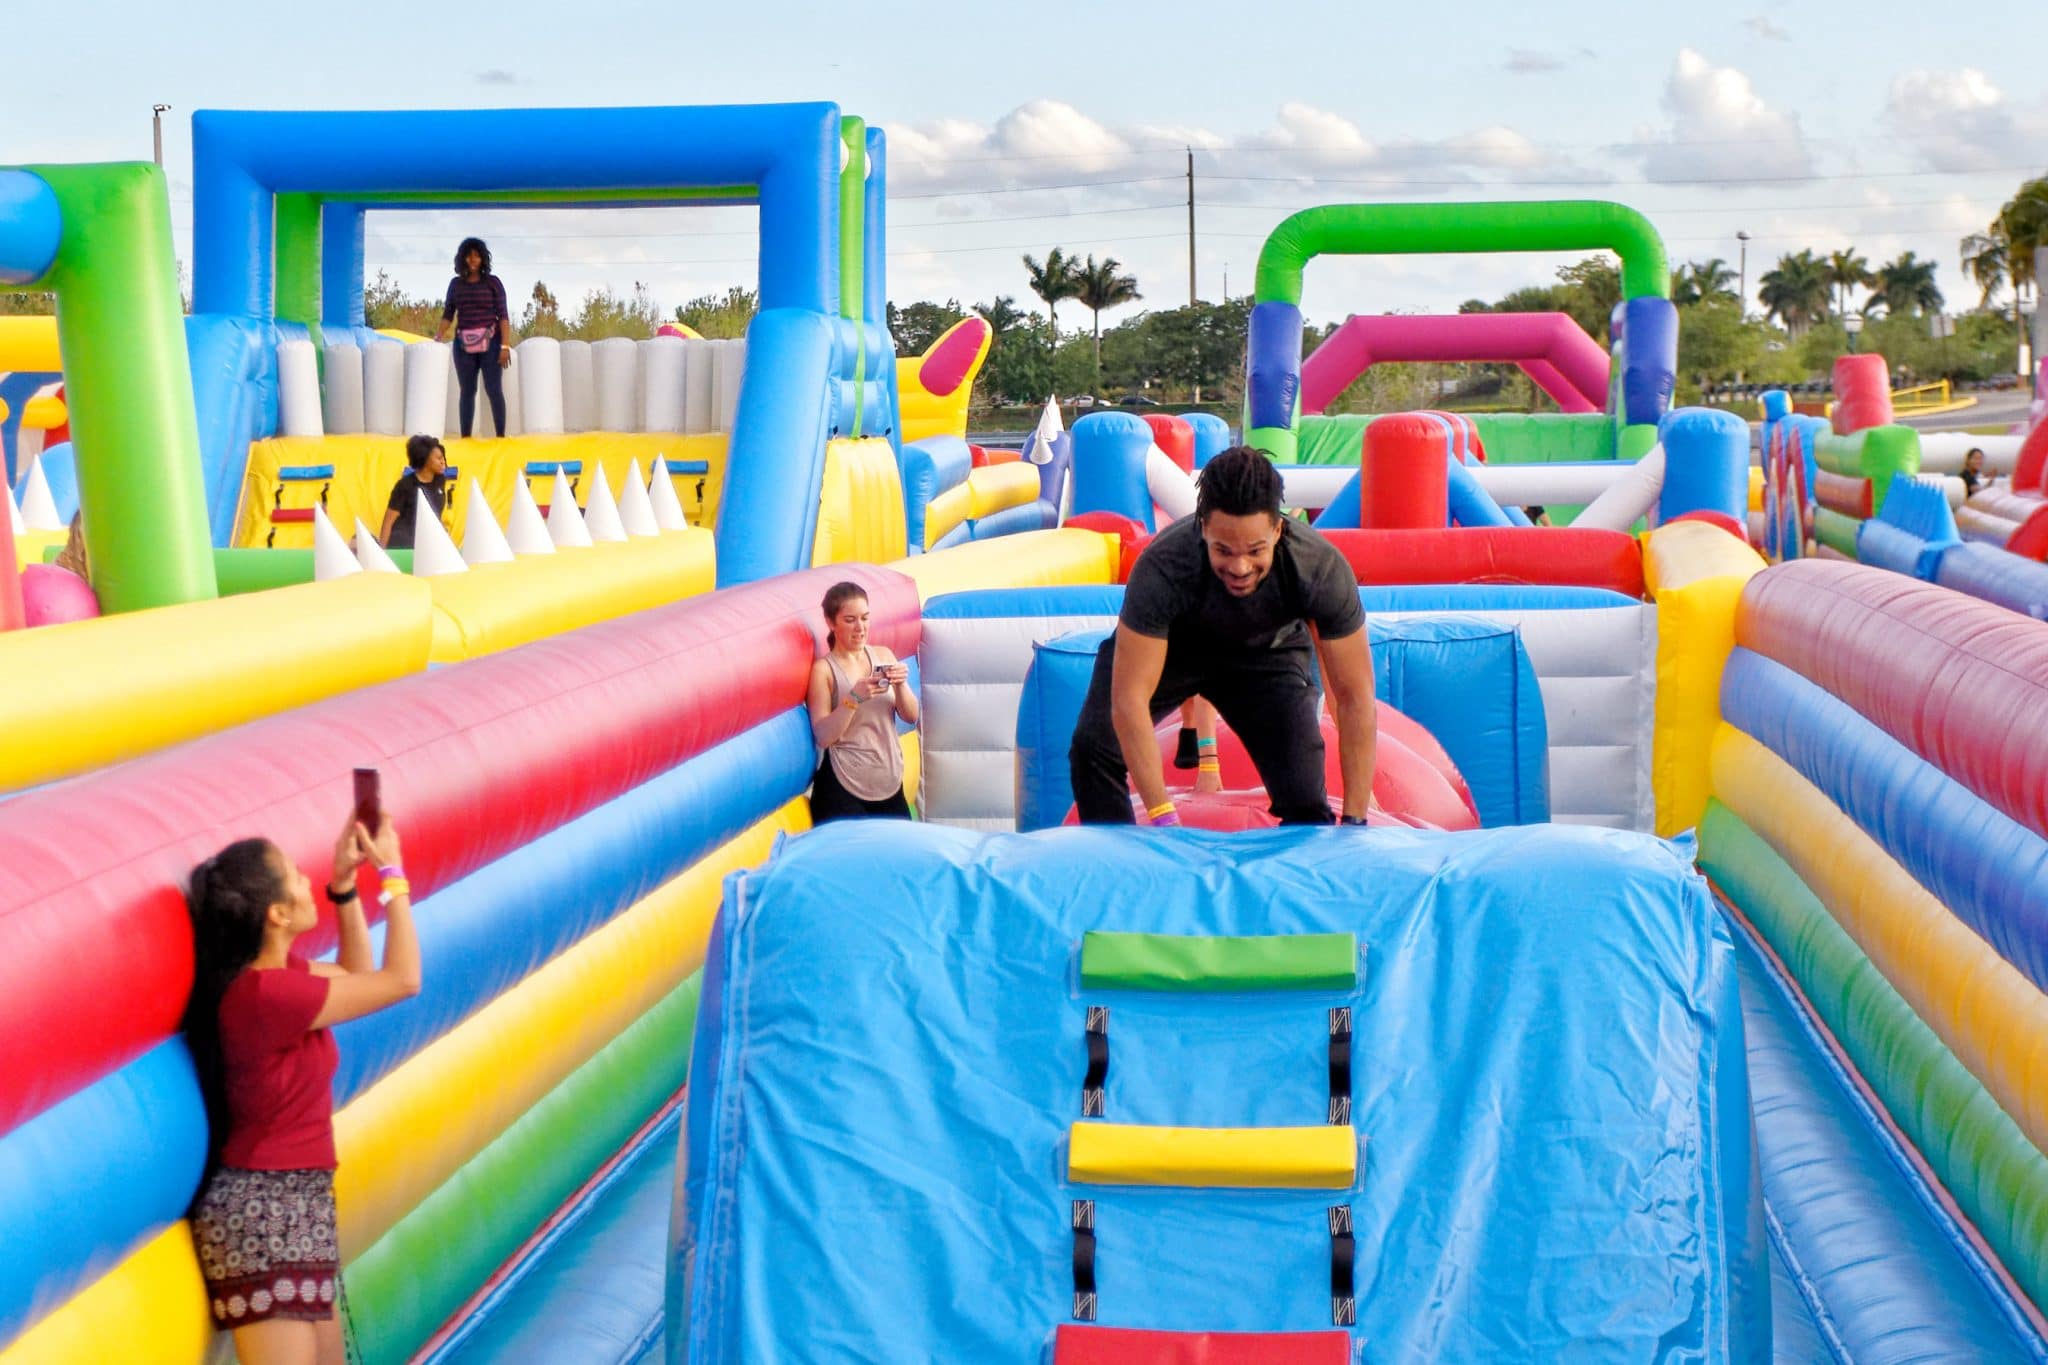 Massive Bounce House to Open in Aurora's Premium Outlets Mall – NBC Chicago